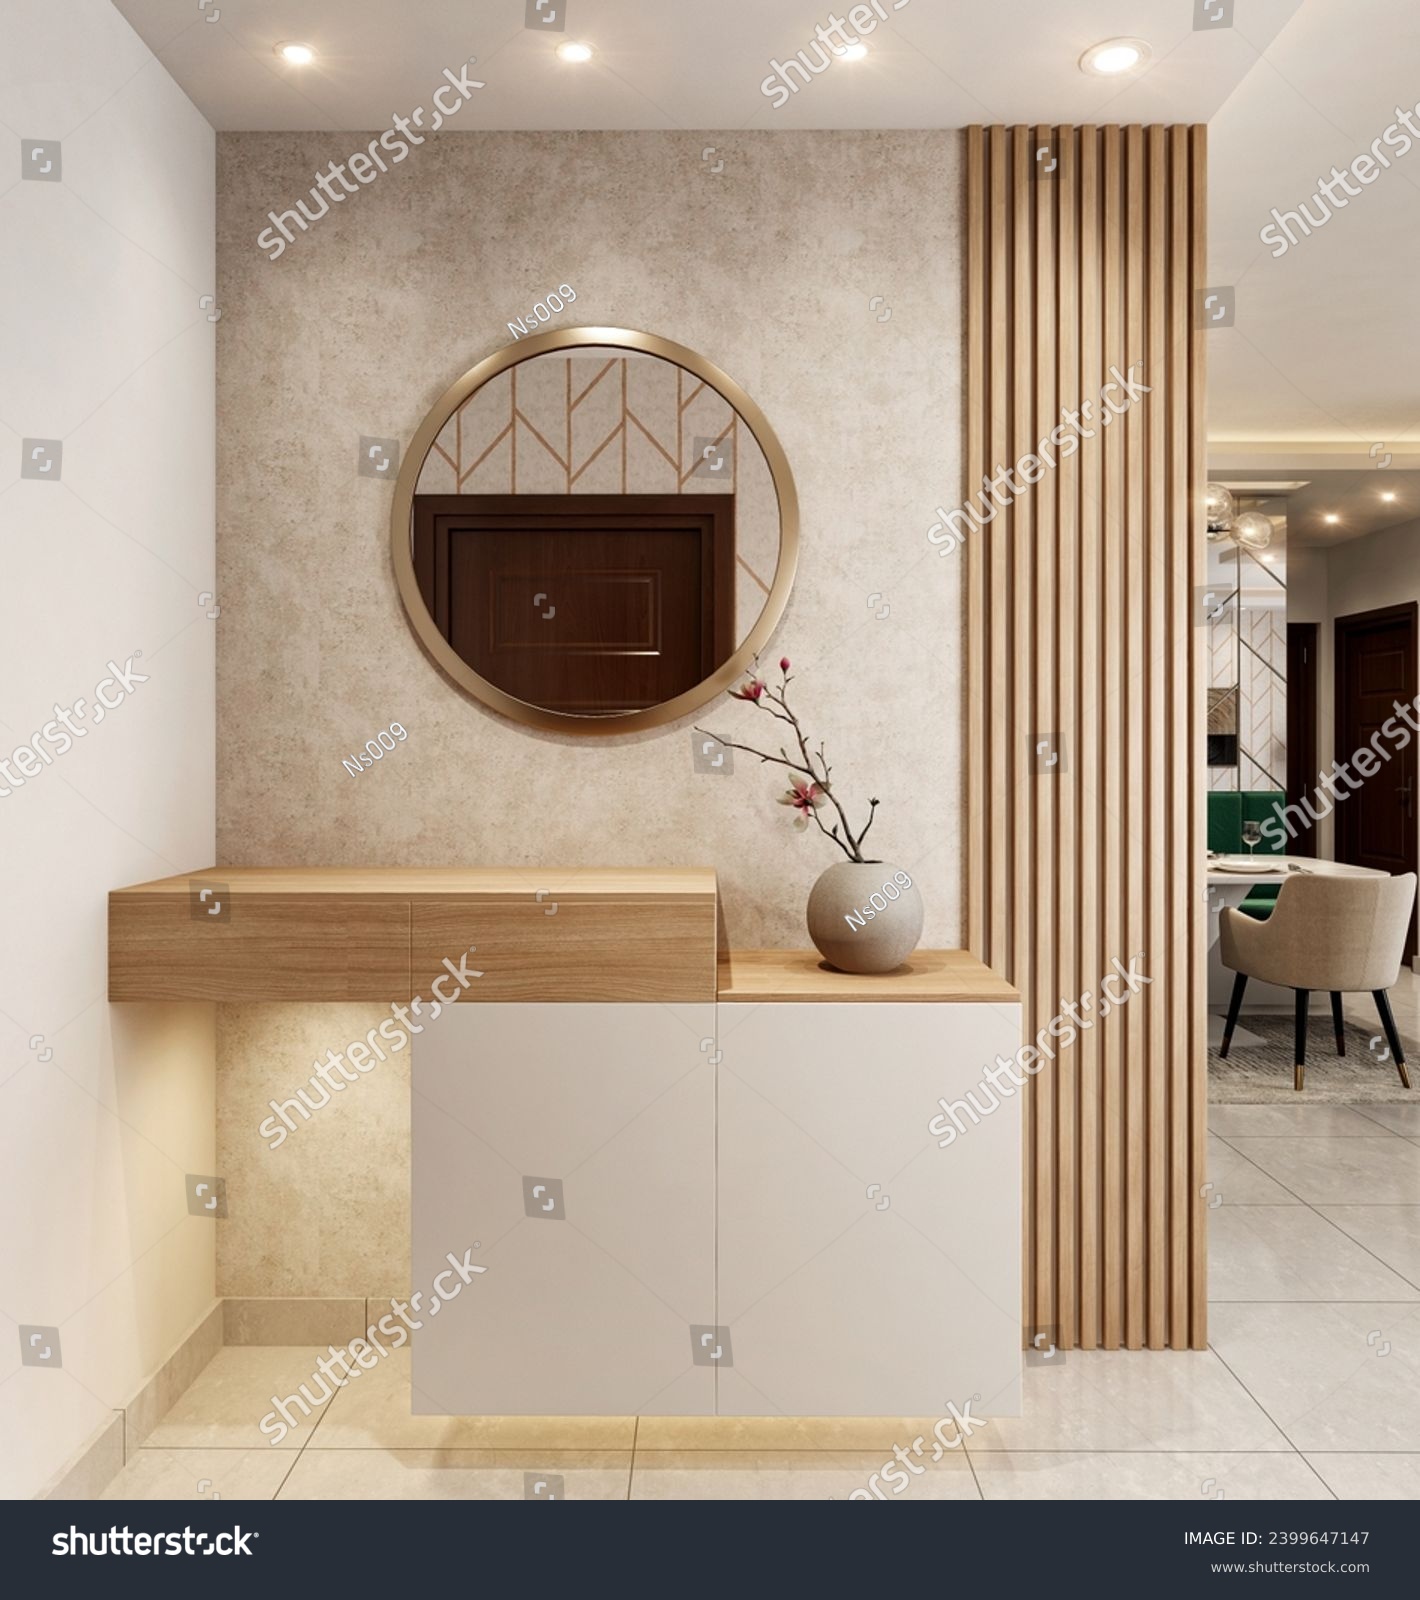 Modern foyer design with light wood and white color storage, round mirror,rafters, vase, and wallpaper. 3d render interior mock-up. #2399647147